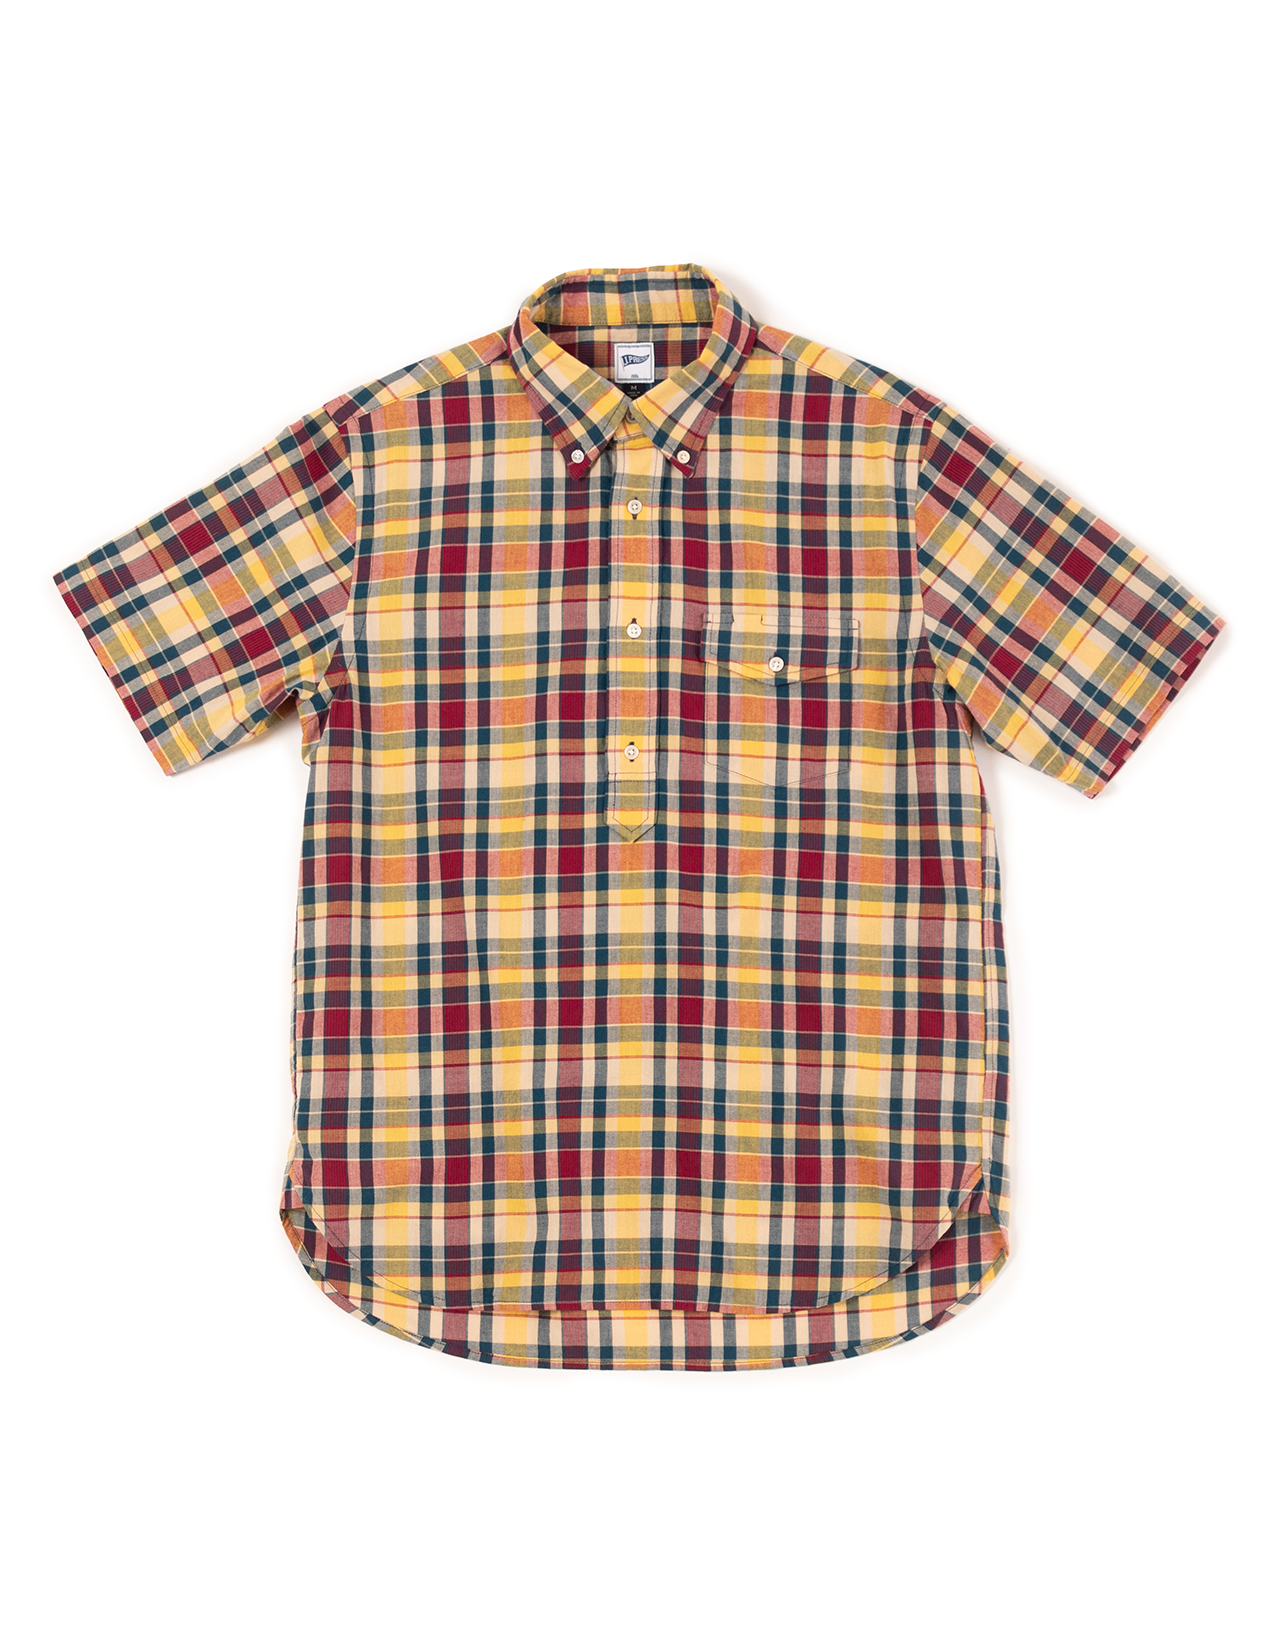 MADRAS POPOVER - YELLOW/RED/NAVY